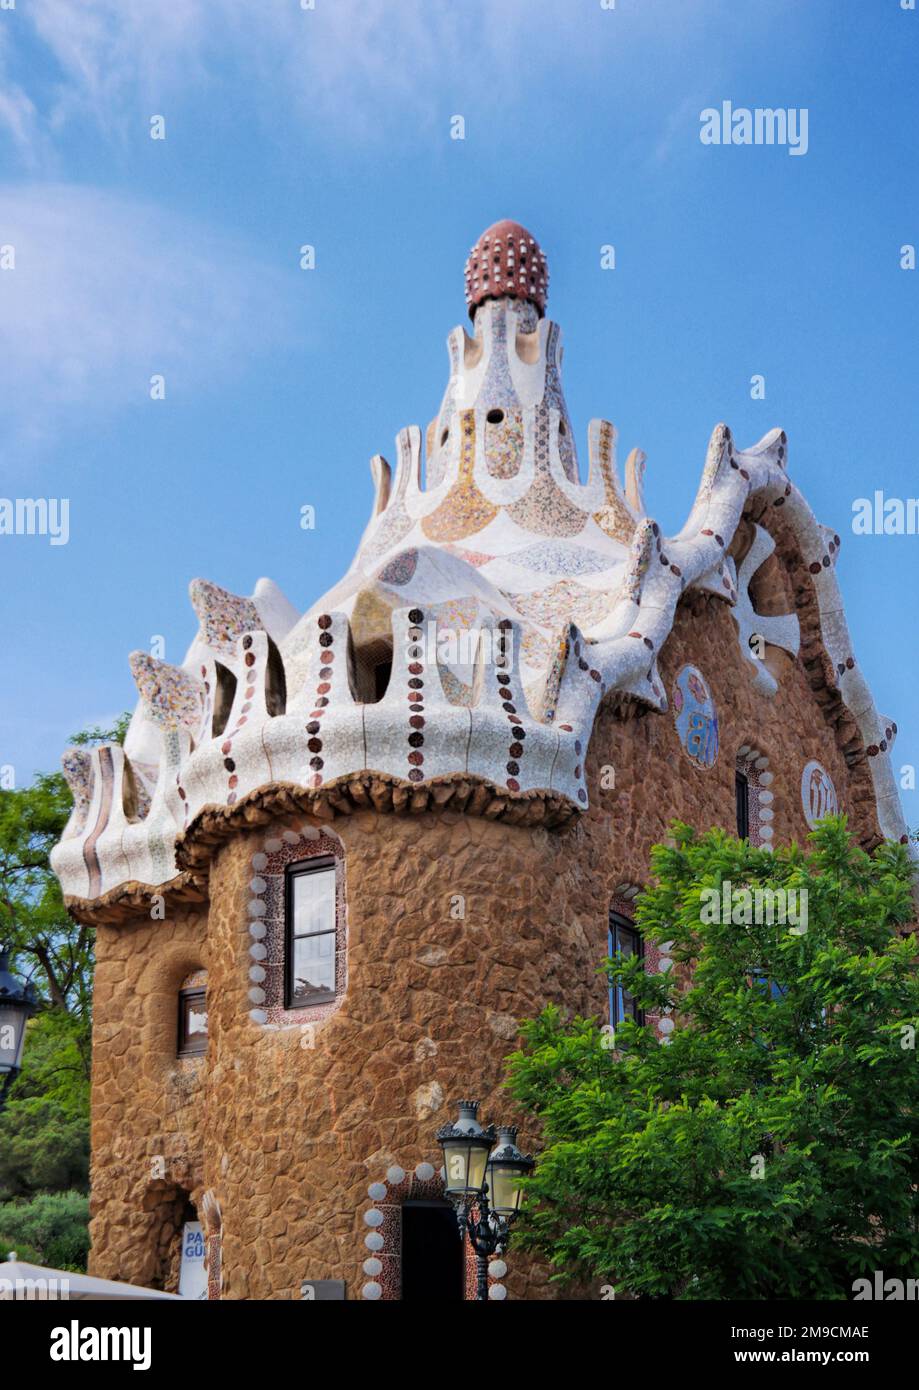 Barcelona, Spain - May 2018: Casa del Guarda of Park Güell. Amazing looking piece of architecture art located in Barcelona. Designed by Antoni Gaudi Stock Photo